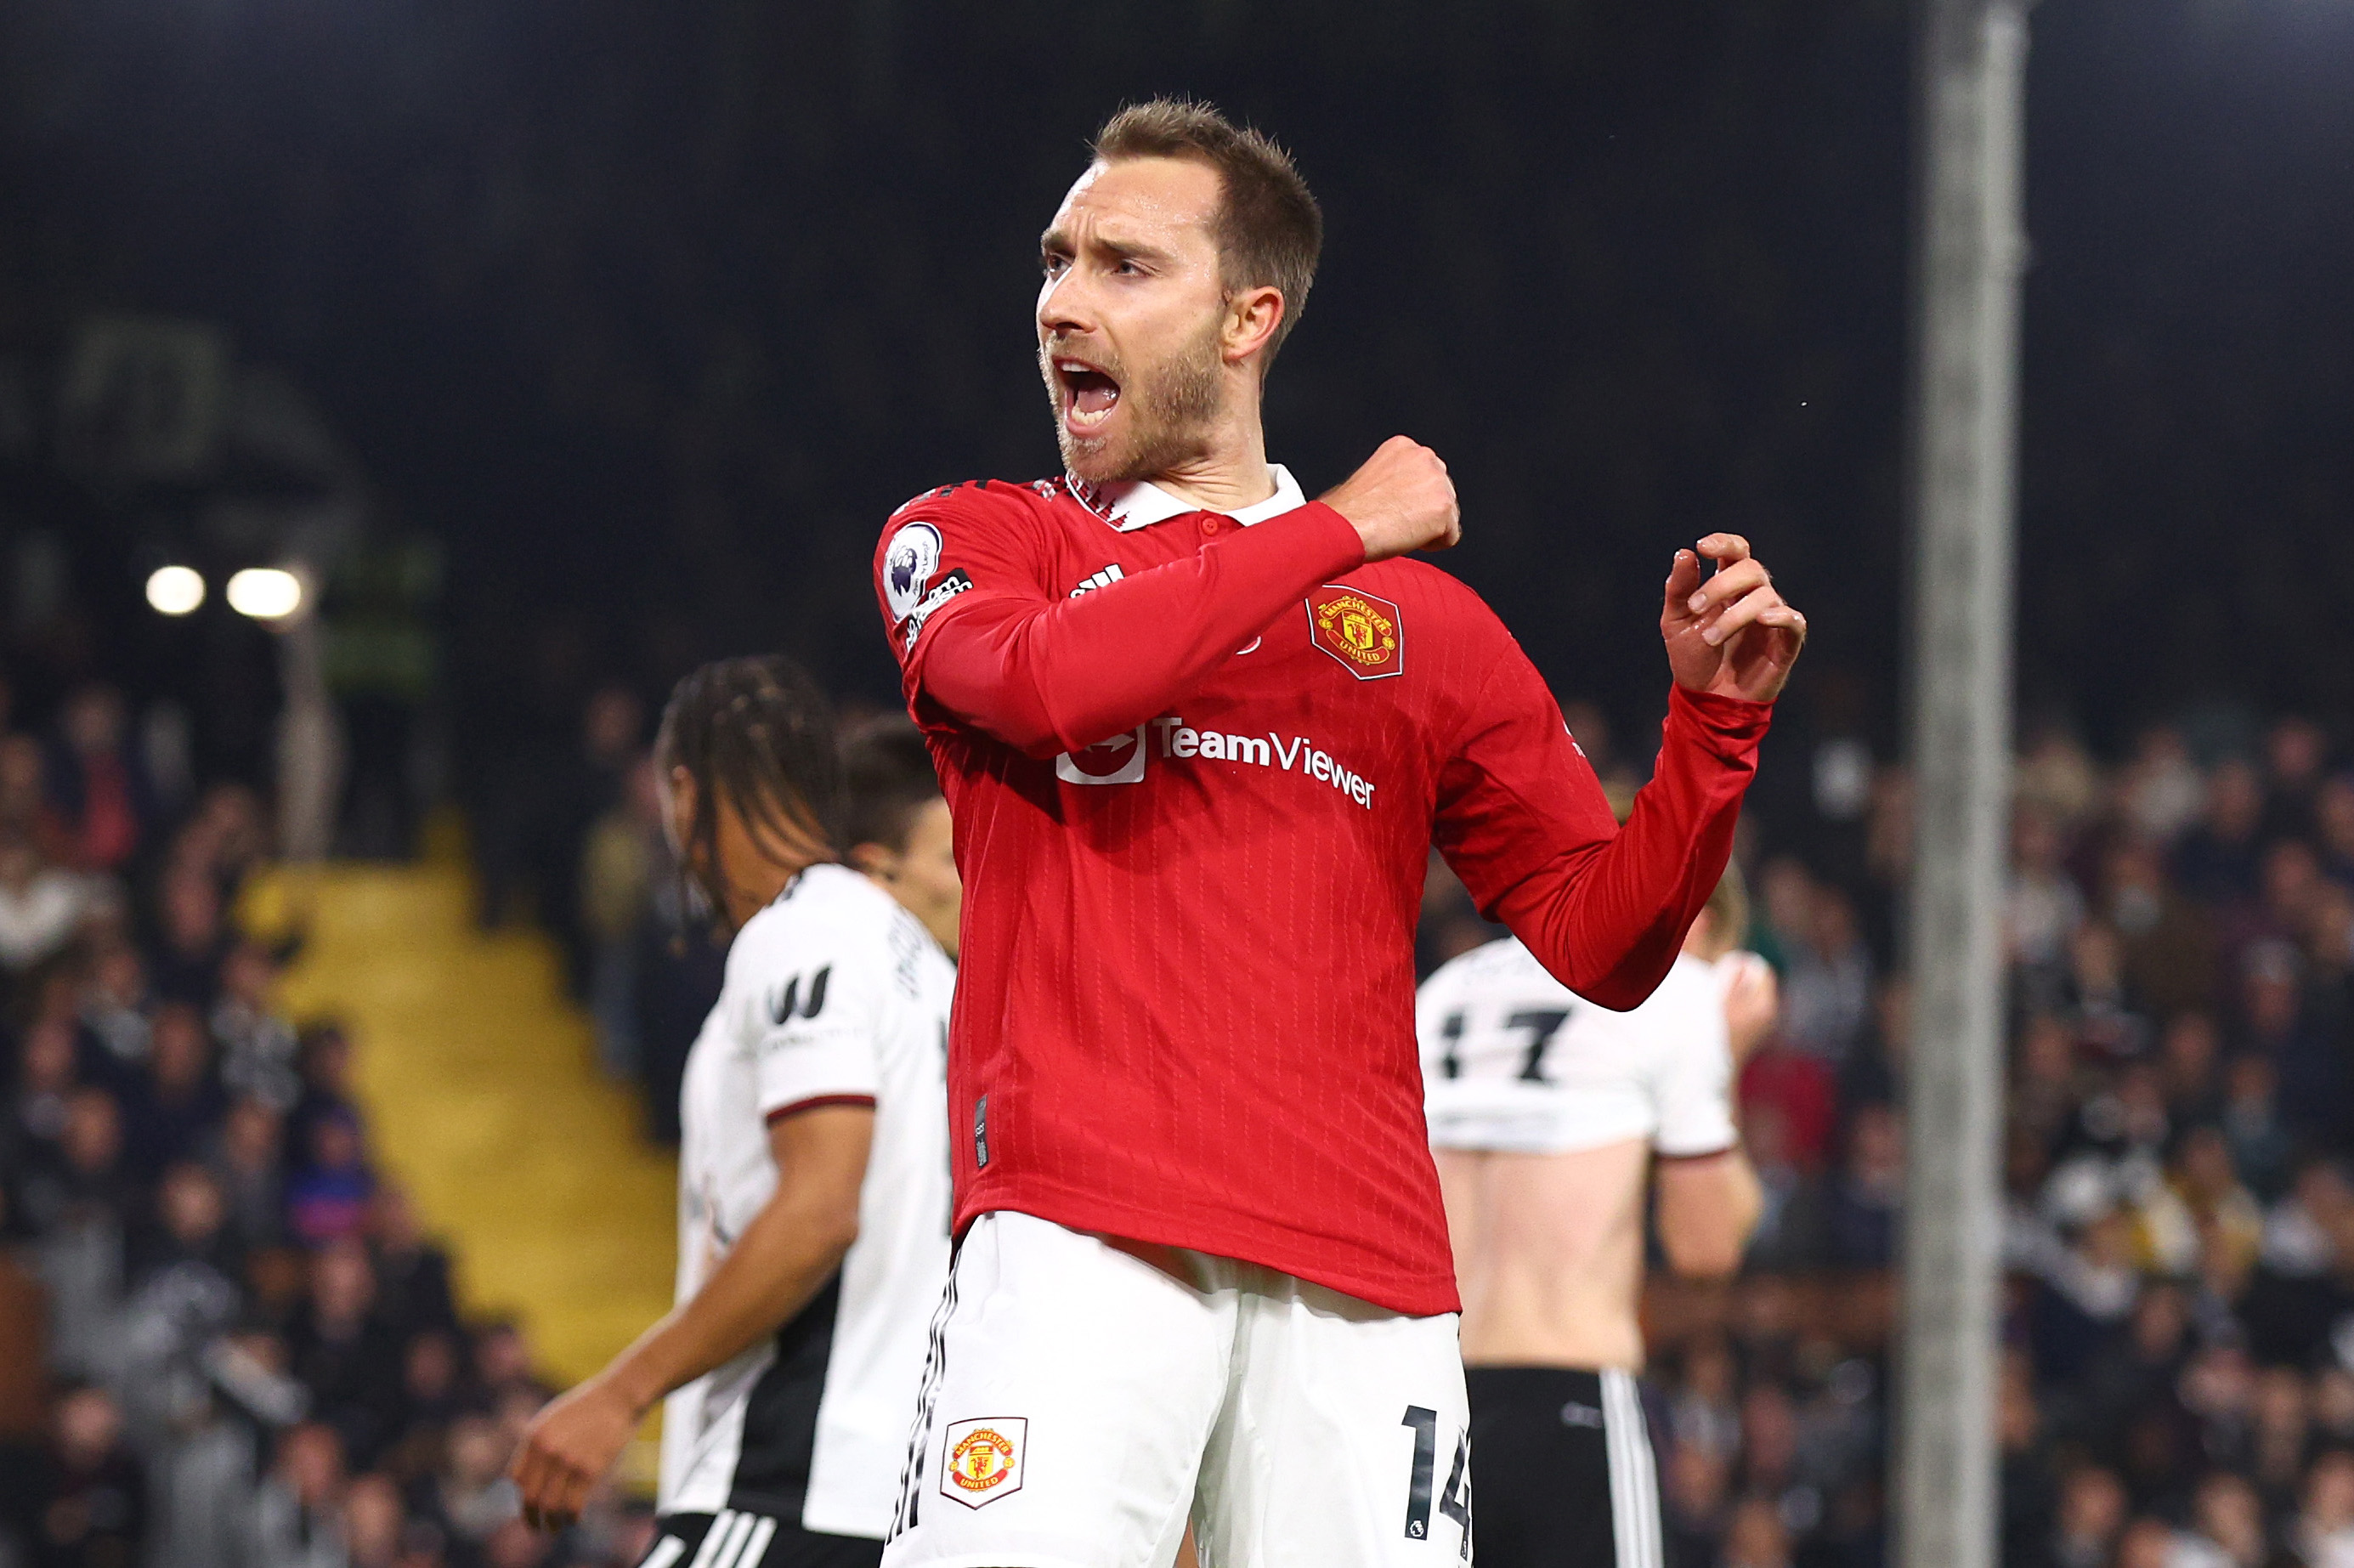 Fulham vs Man United Live Streaming: FUL 0-0 MUN, Manchester United aim TOP FOUR spot in Premier League with Fulham win - Follow LIVE